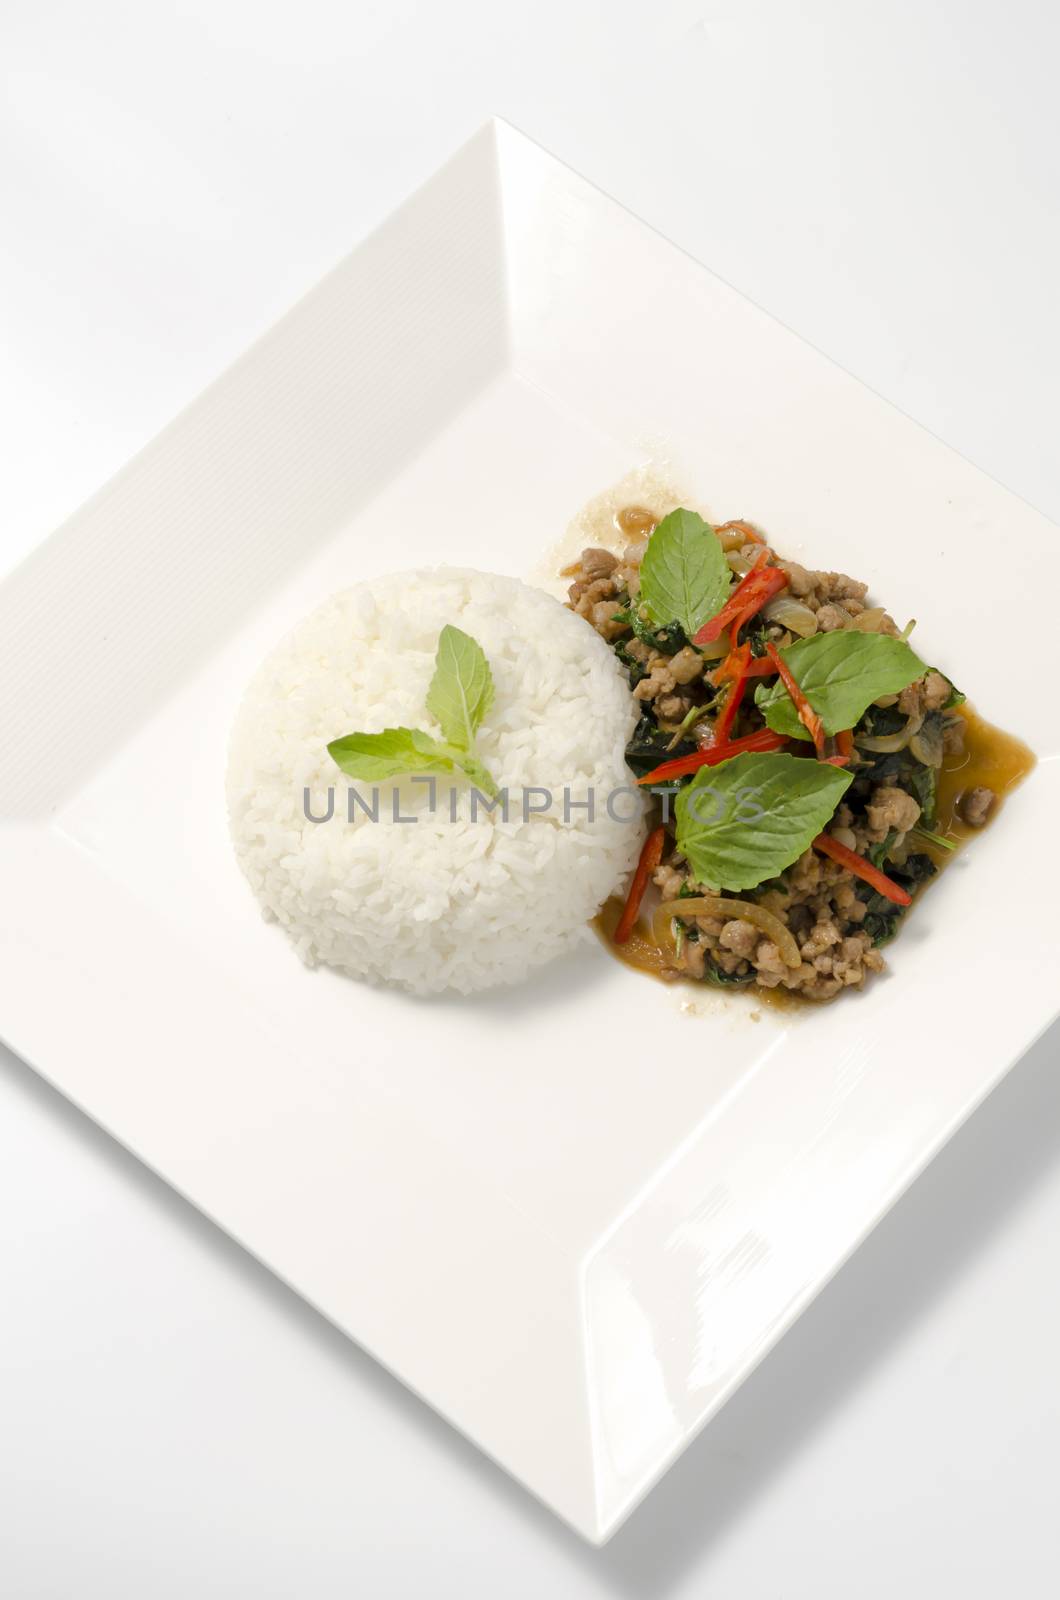 Rice topped with stir-fried pork and basil by ammza12